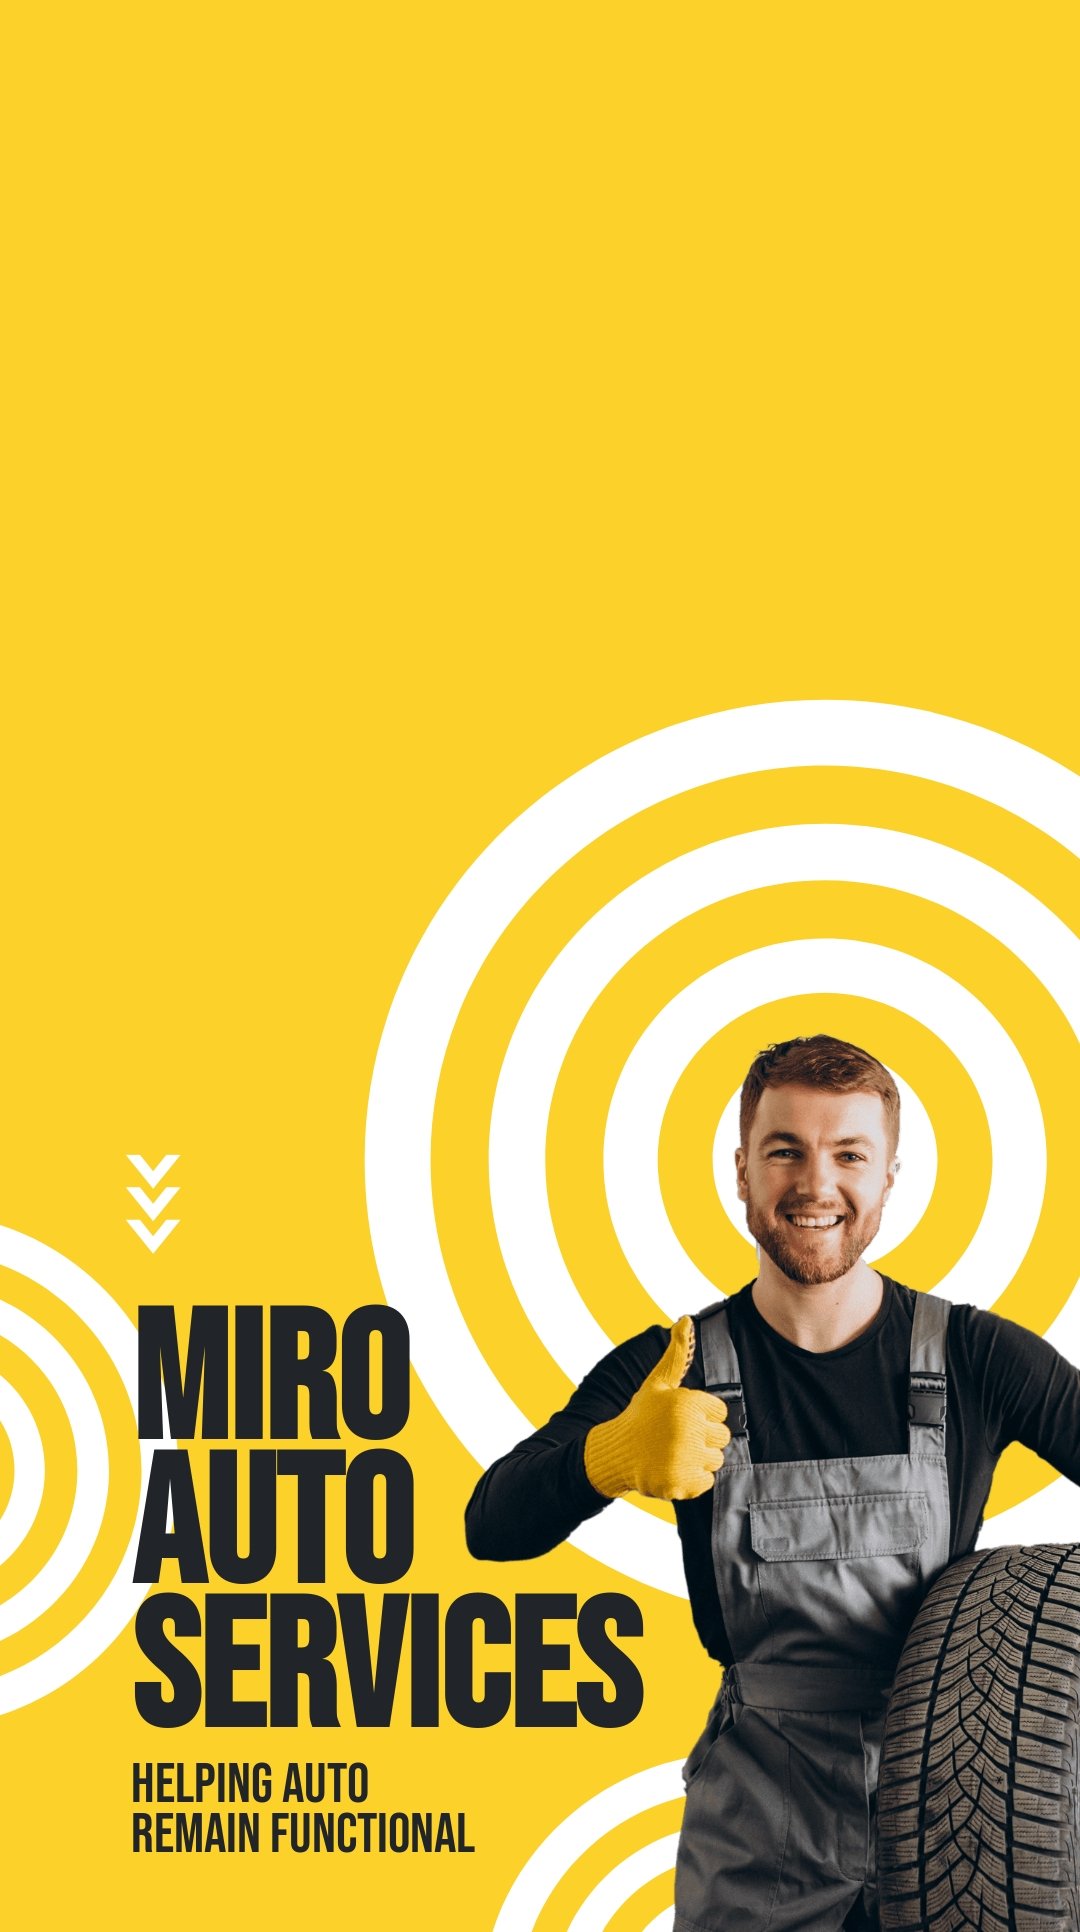 Auto Services Snapchat Geofilter Template